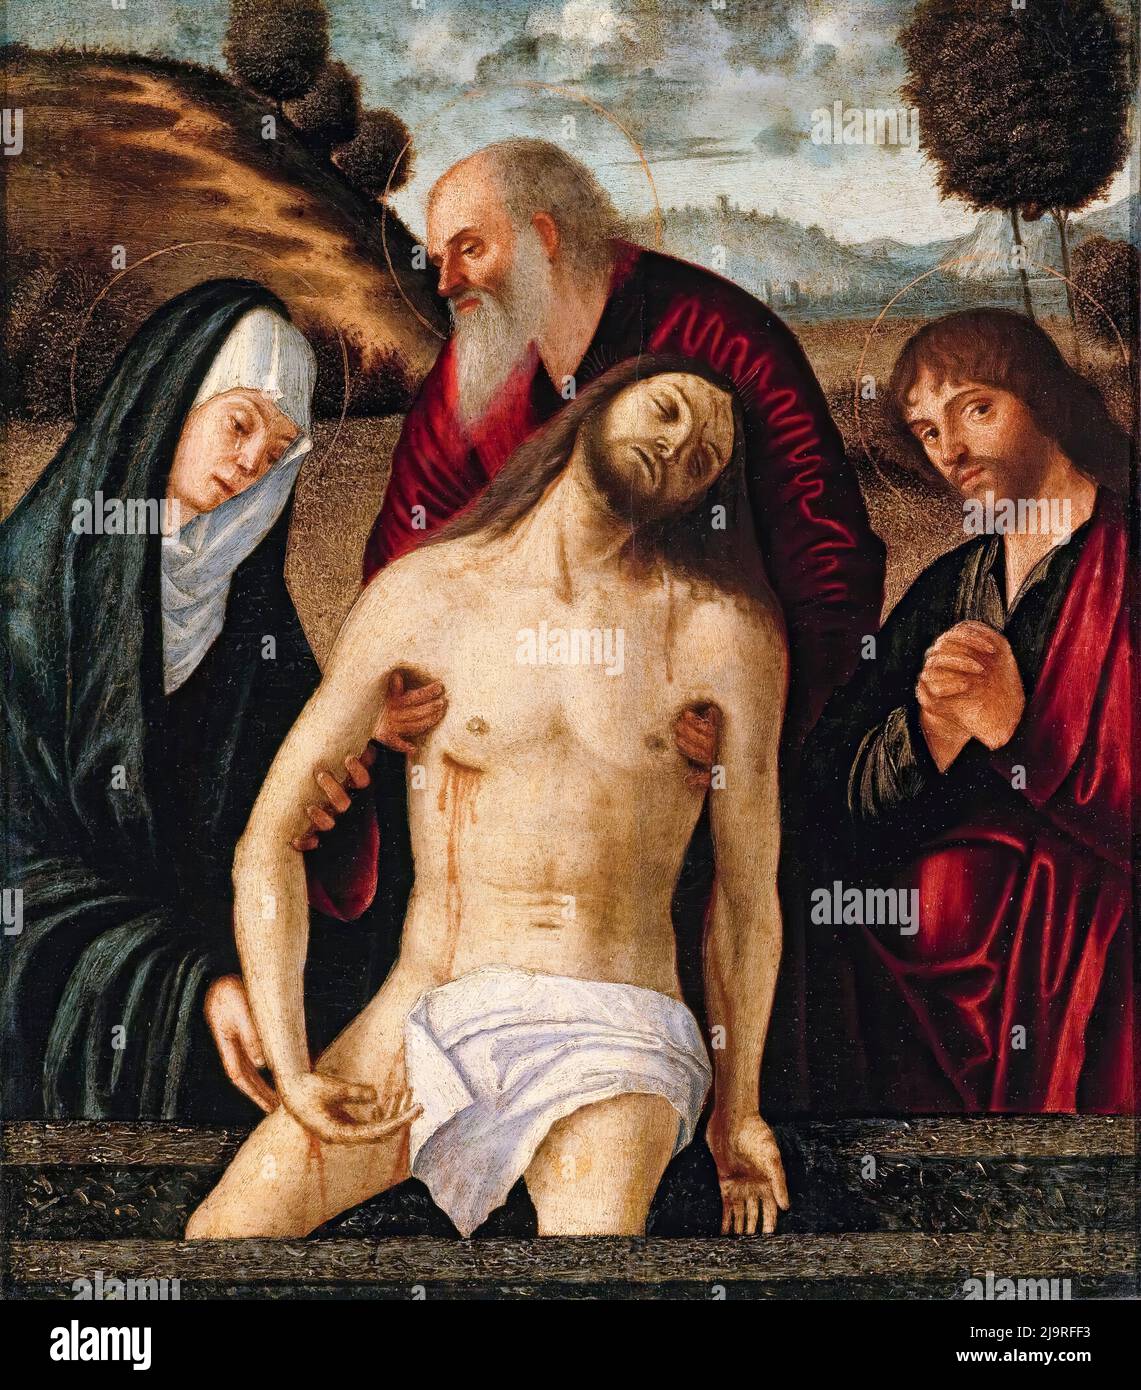 The Lamentation with the Madonna and Saints Joseph of Arimathea and John the Evangelist, painting in oil on panel by Vittore Carpaccio, 1508-1511 Stock Photo